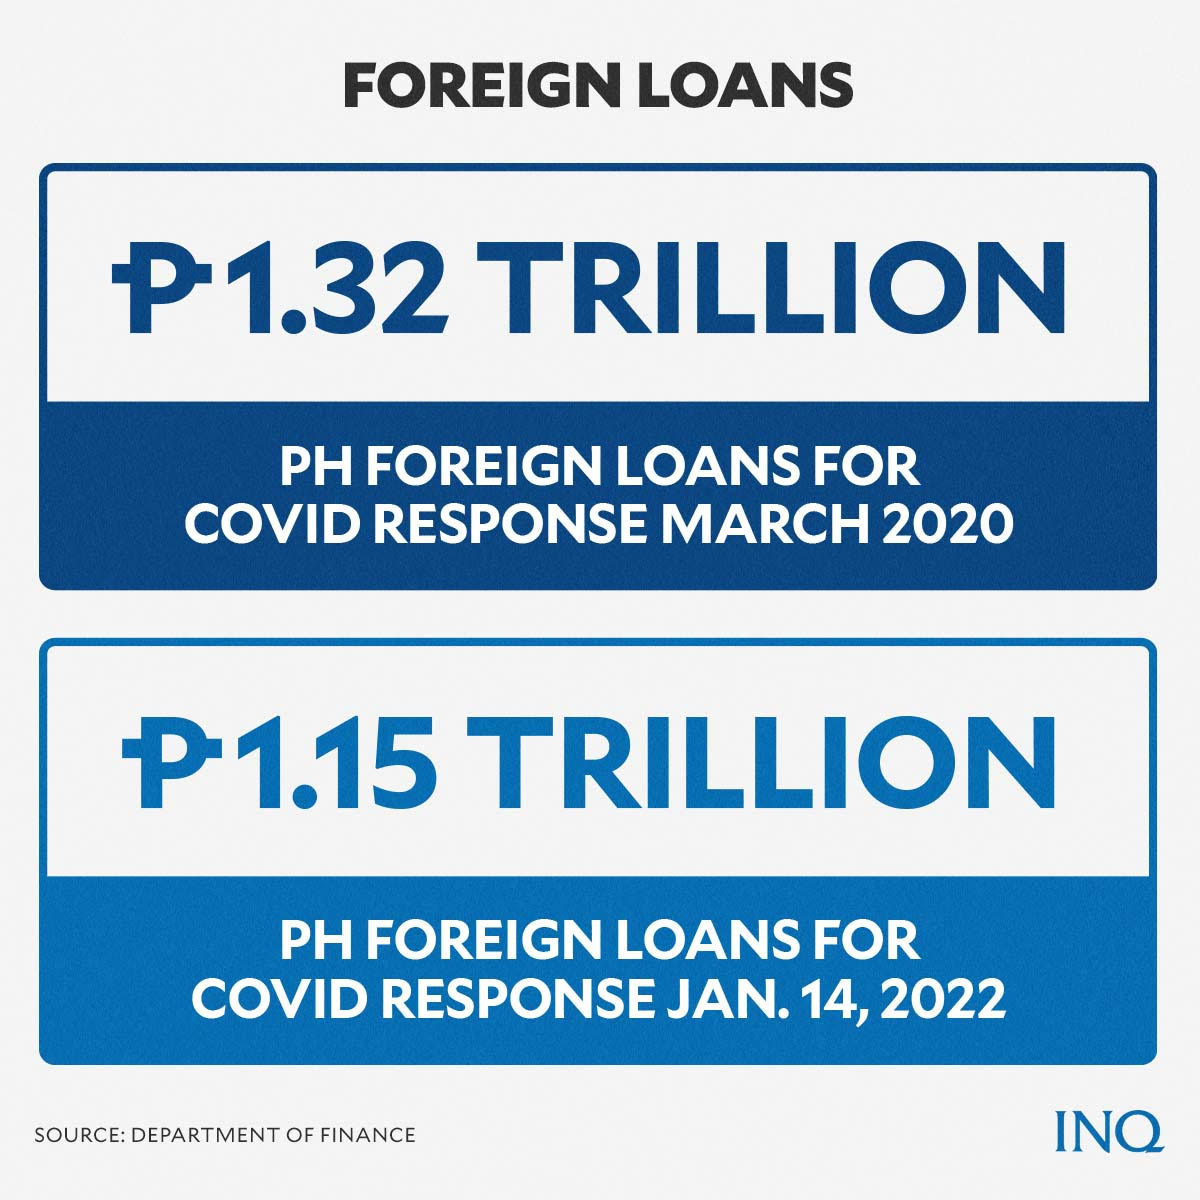 Foreign loans